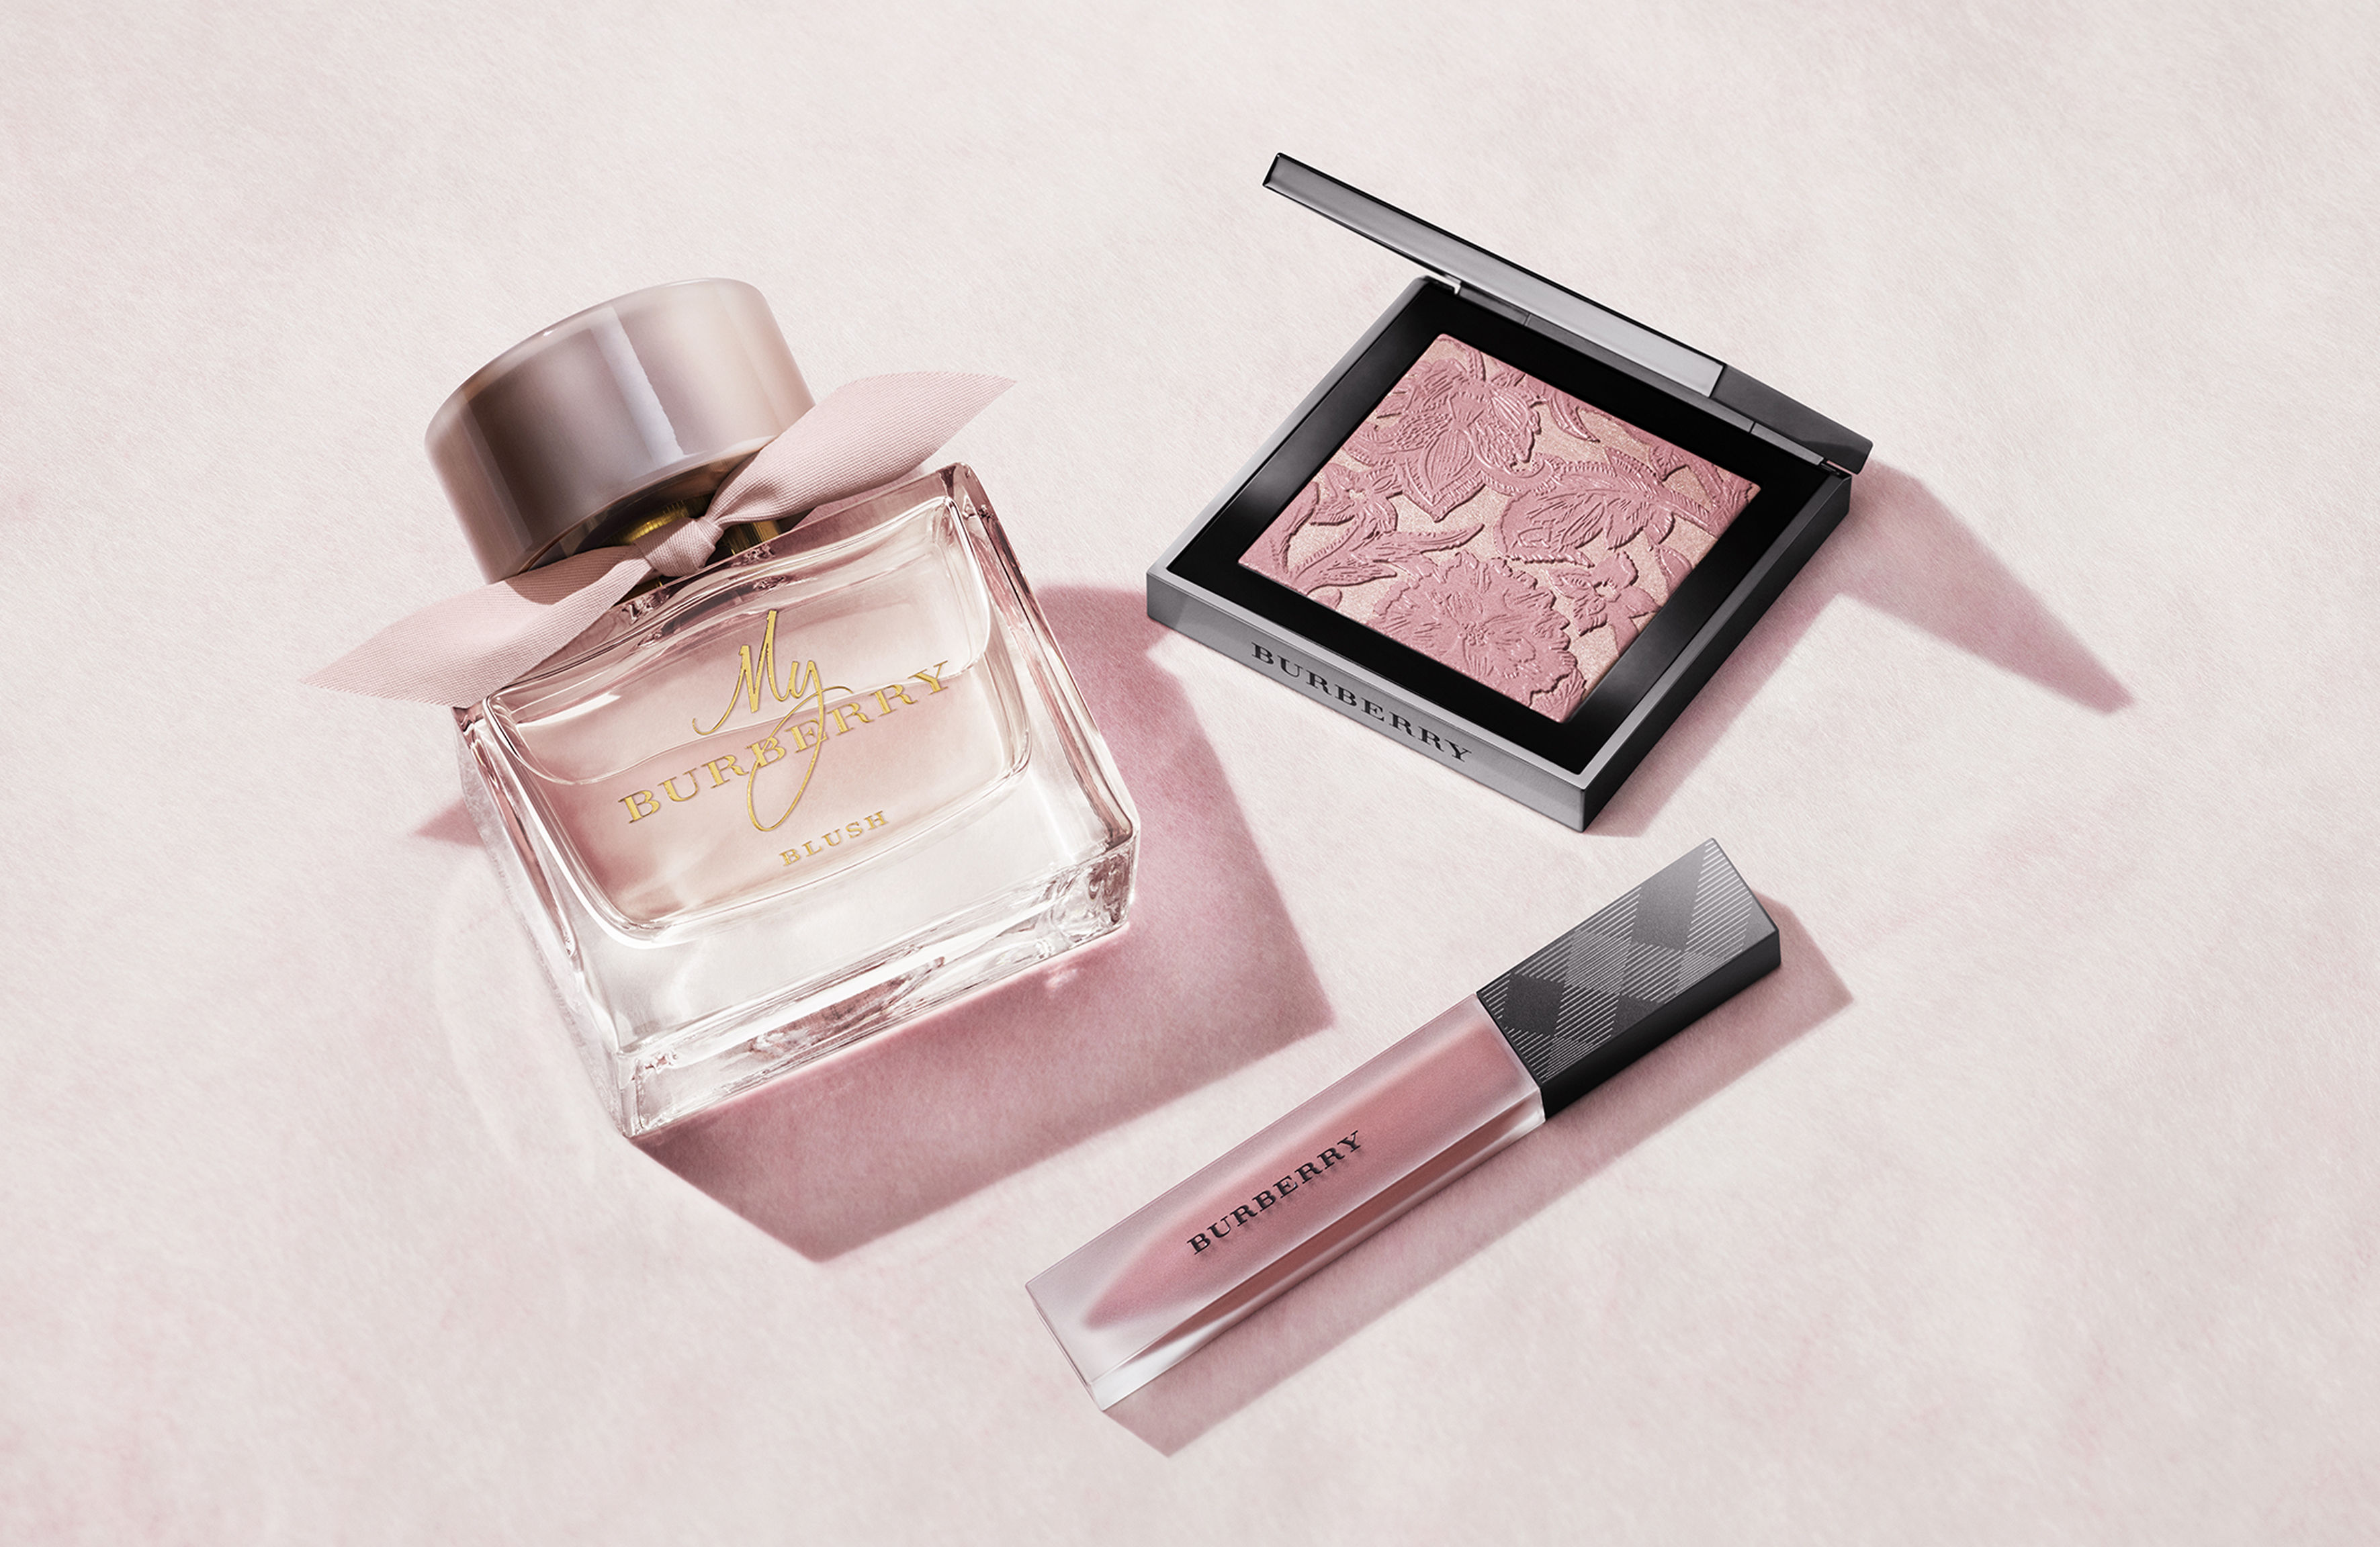 If you love pink, you need everything in the new Burberry Blush collection